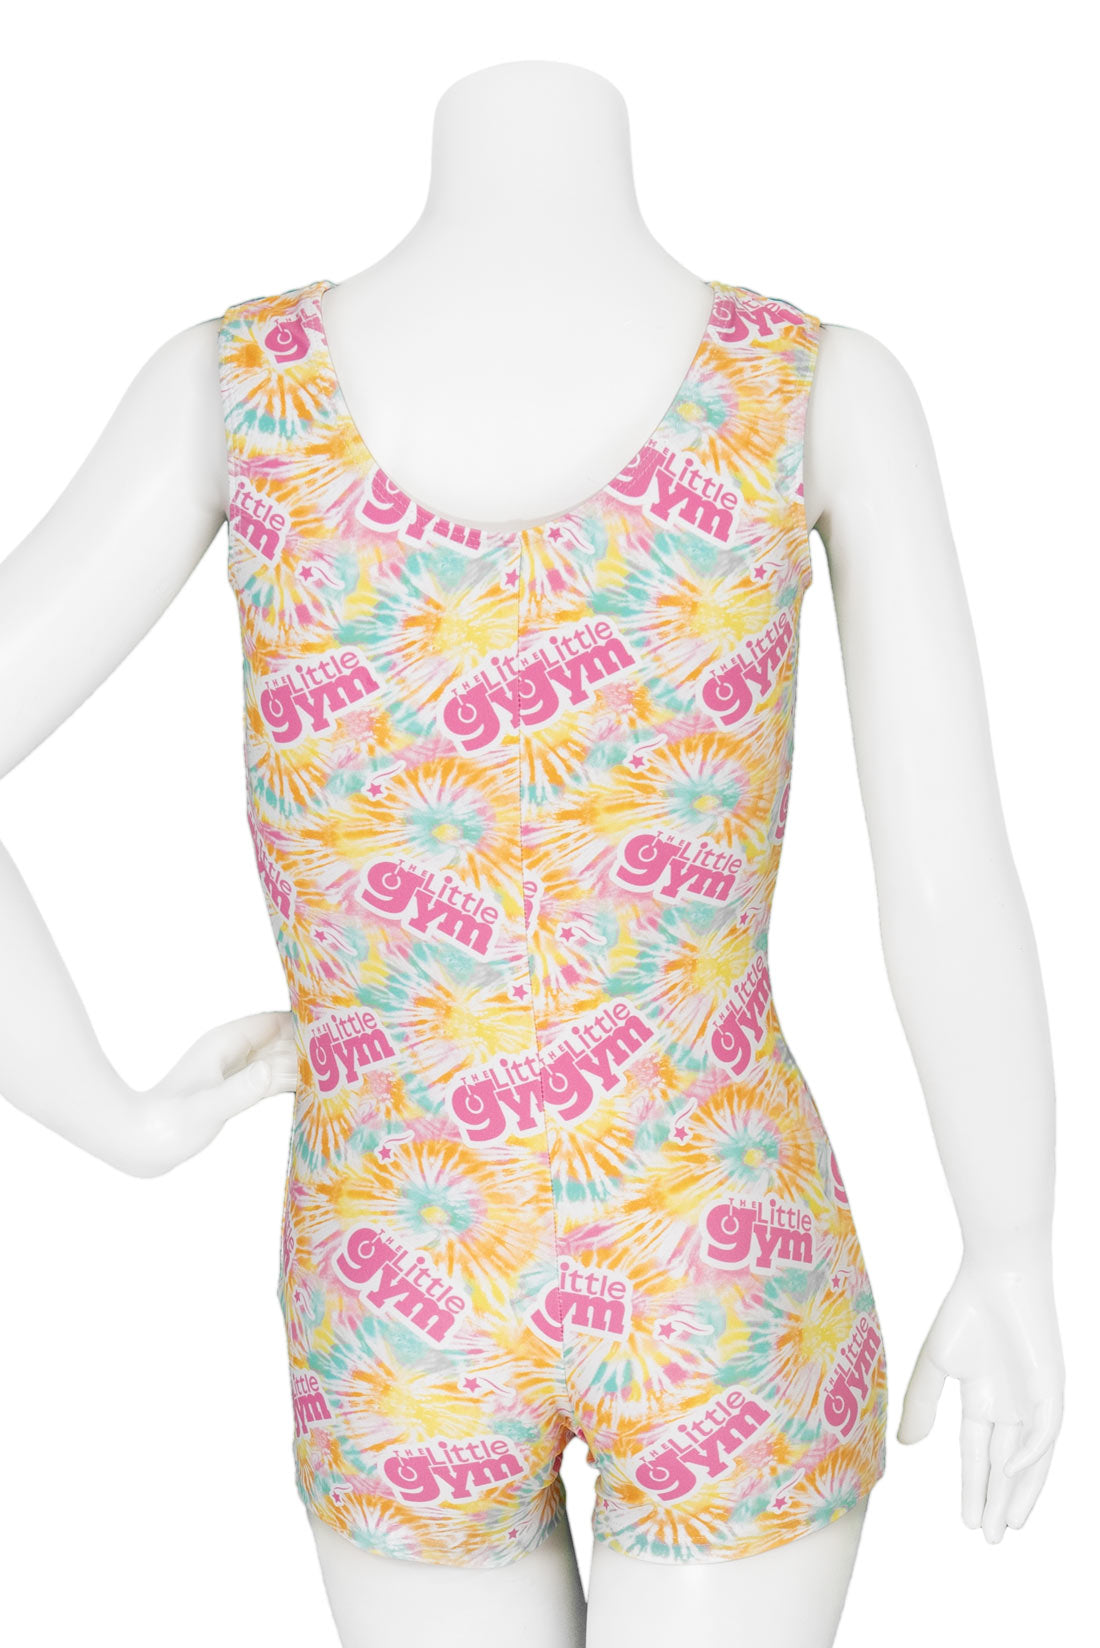 Gymnastics unitard for girls in bright summer colors exclusive for The Little Gym by Destira, 2023